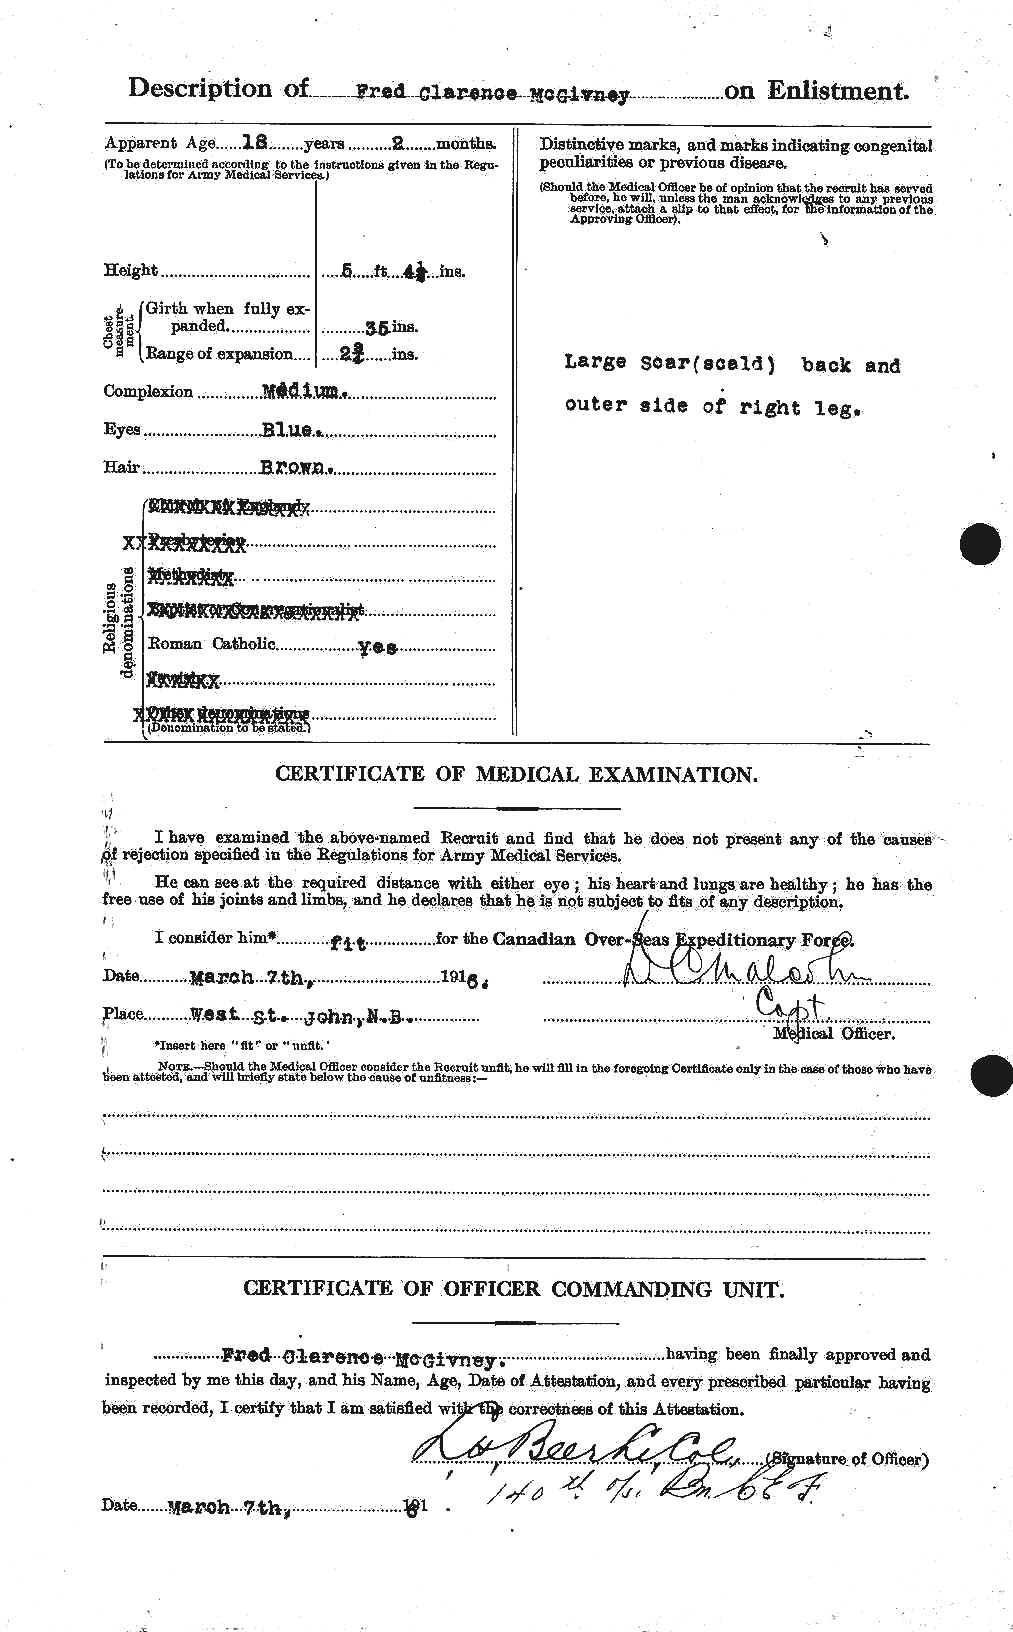 Personnel Records of the First World War - CEF 528389b